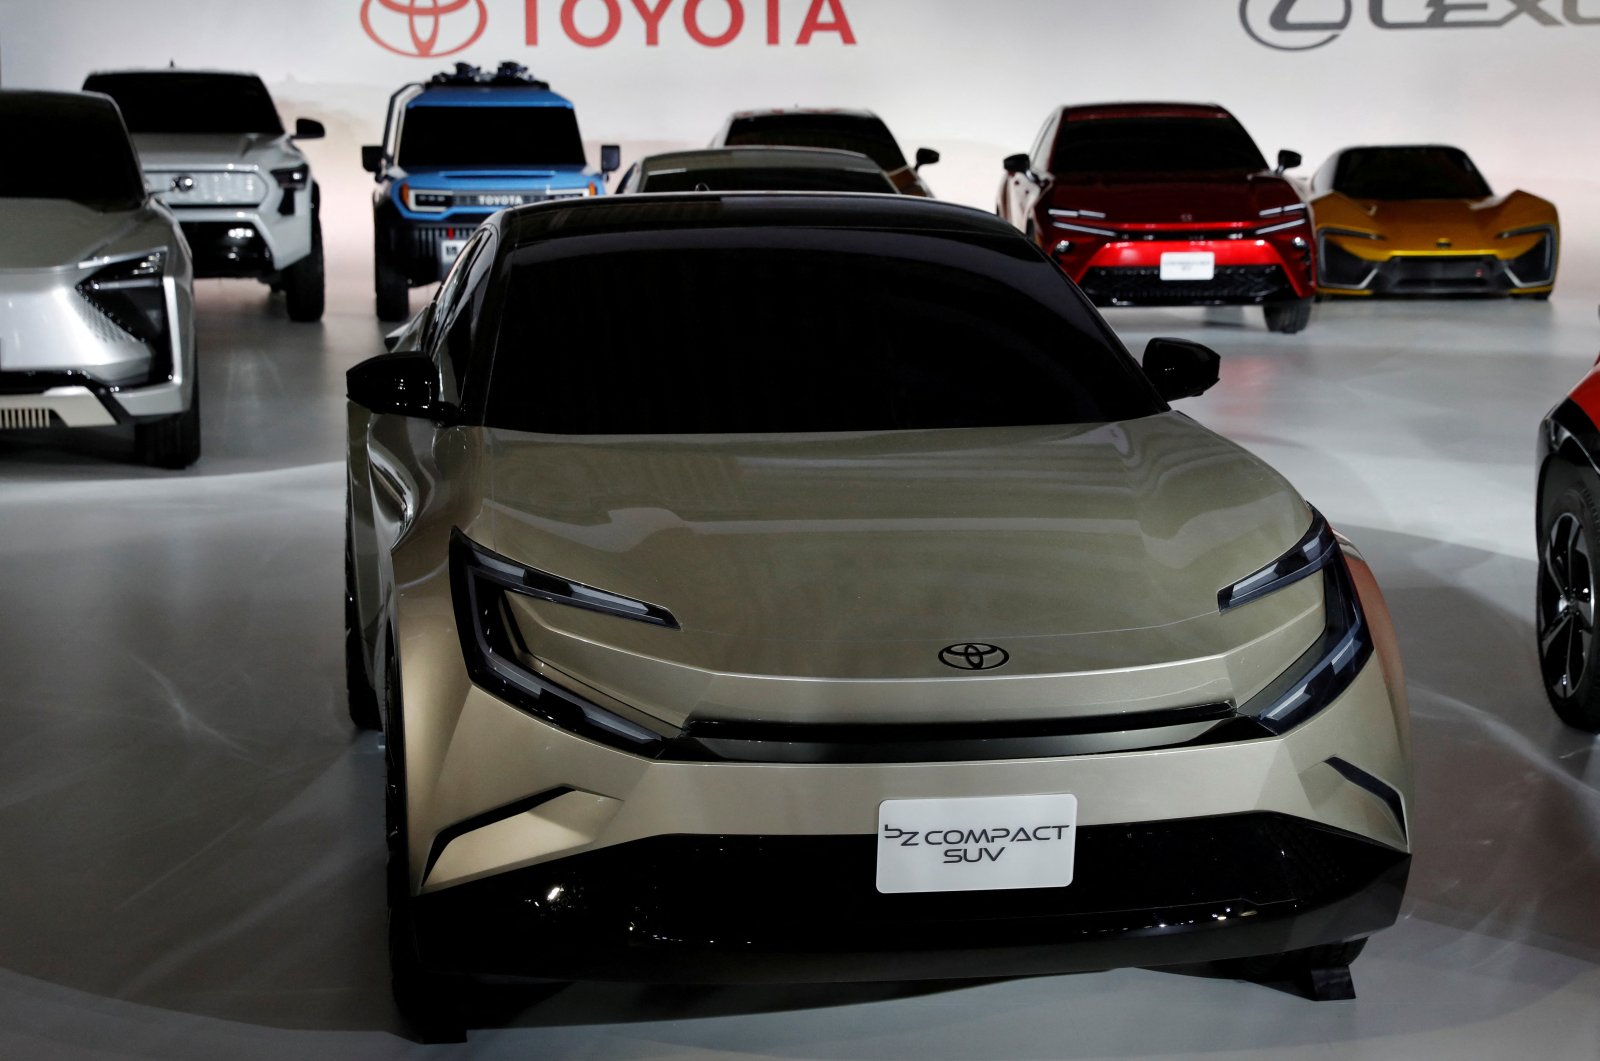 Toyota Motor Corporation&#039;s bZ Compact SUV is pictured after a briefing on the company&#039;s strategies on battery EVs in Tokyo, Japan, Dec. 14, 2021. (Reuters Photo)